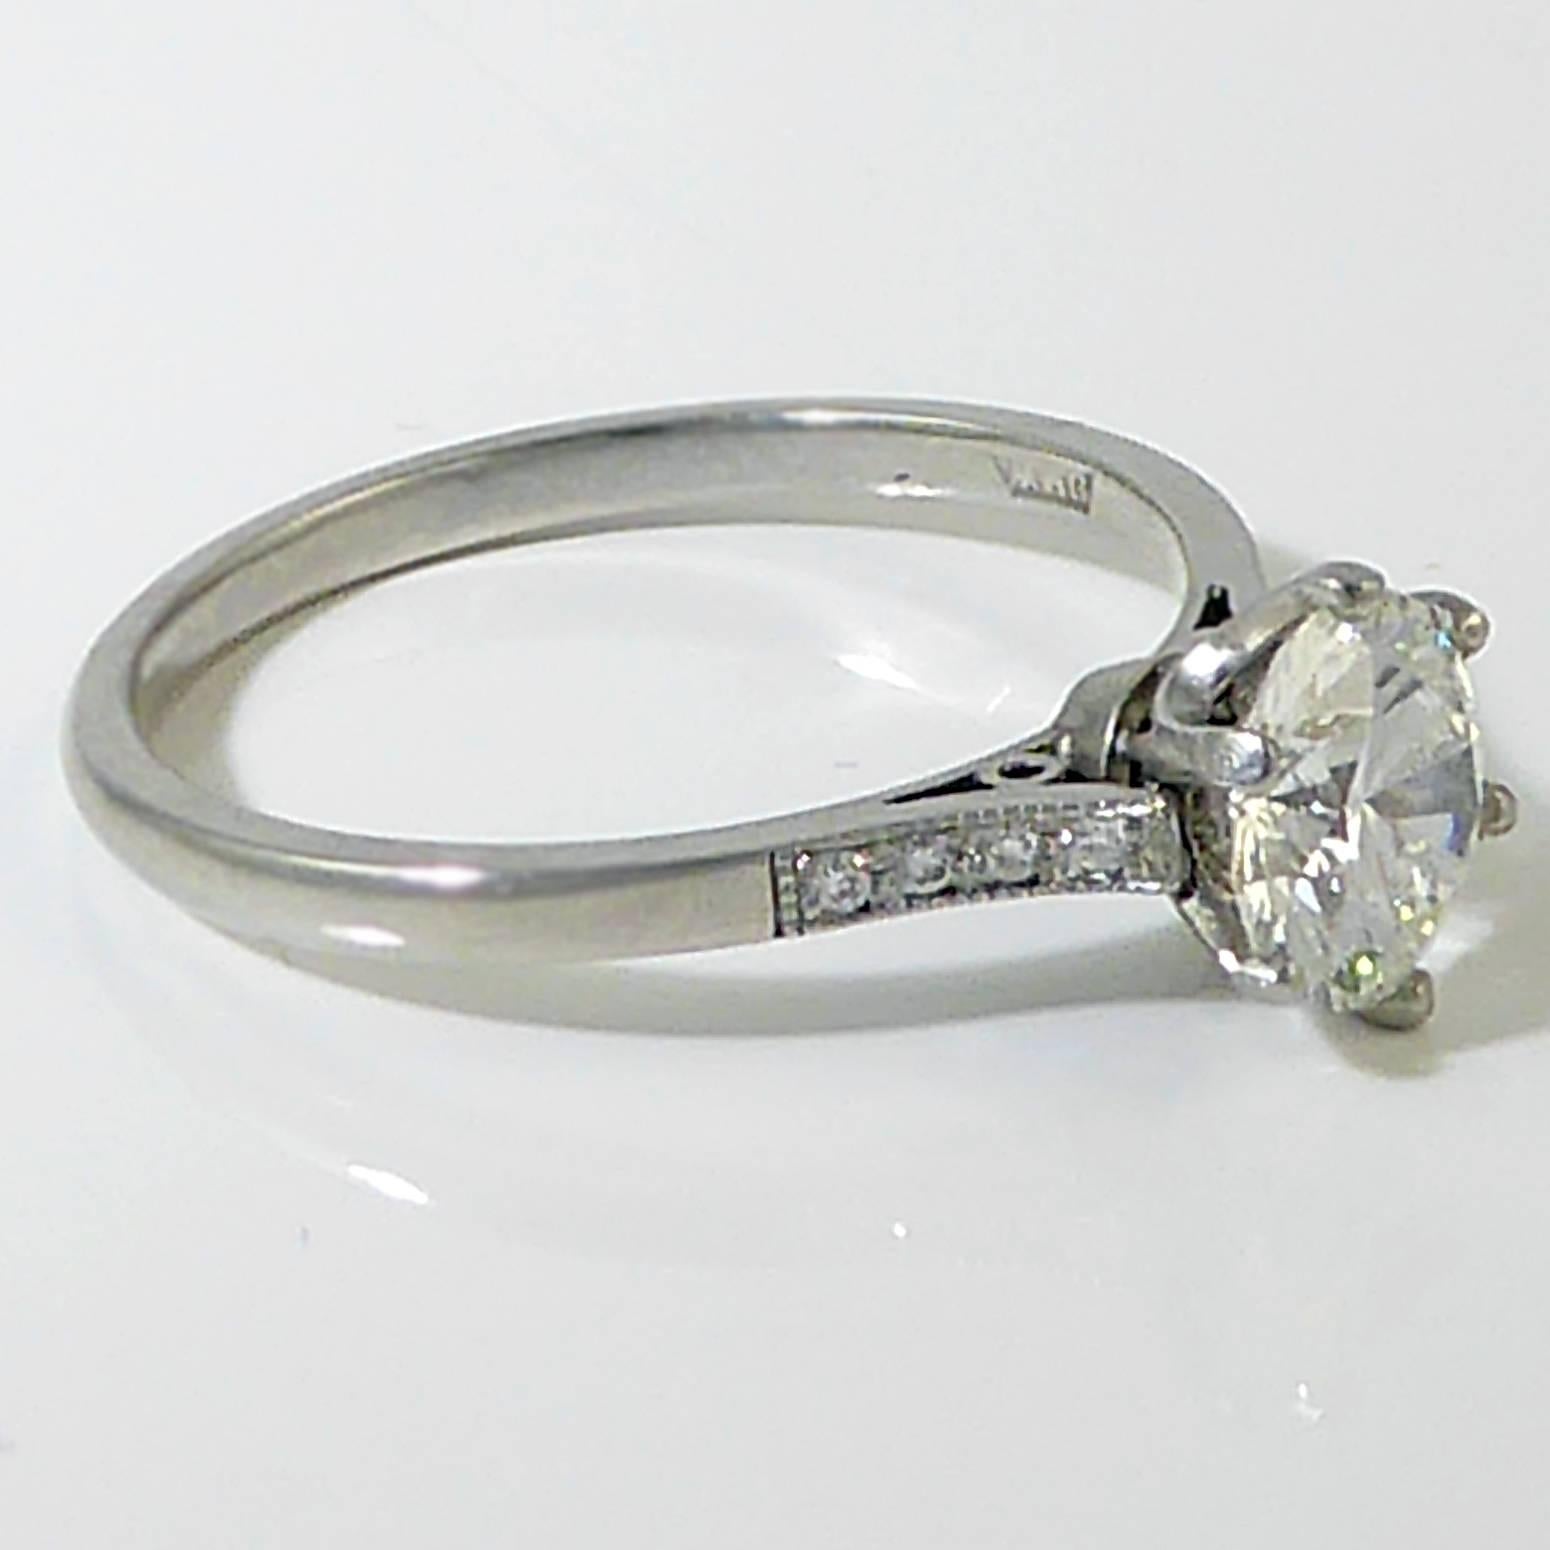 Pre-owned diamond solitaire engagement ring set with a brilliant cut diamond 1.04ct, of E colour and VVS2 clarity, with an excellent cut grade and no fluorescence, as detailed by an GIA certificate number 2127243731, dated 17th June, 2011.  The